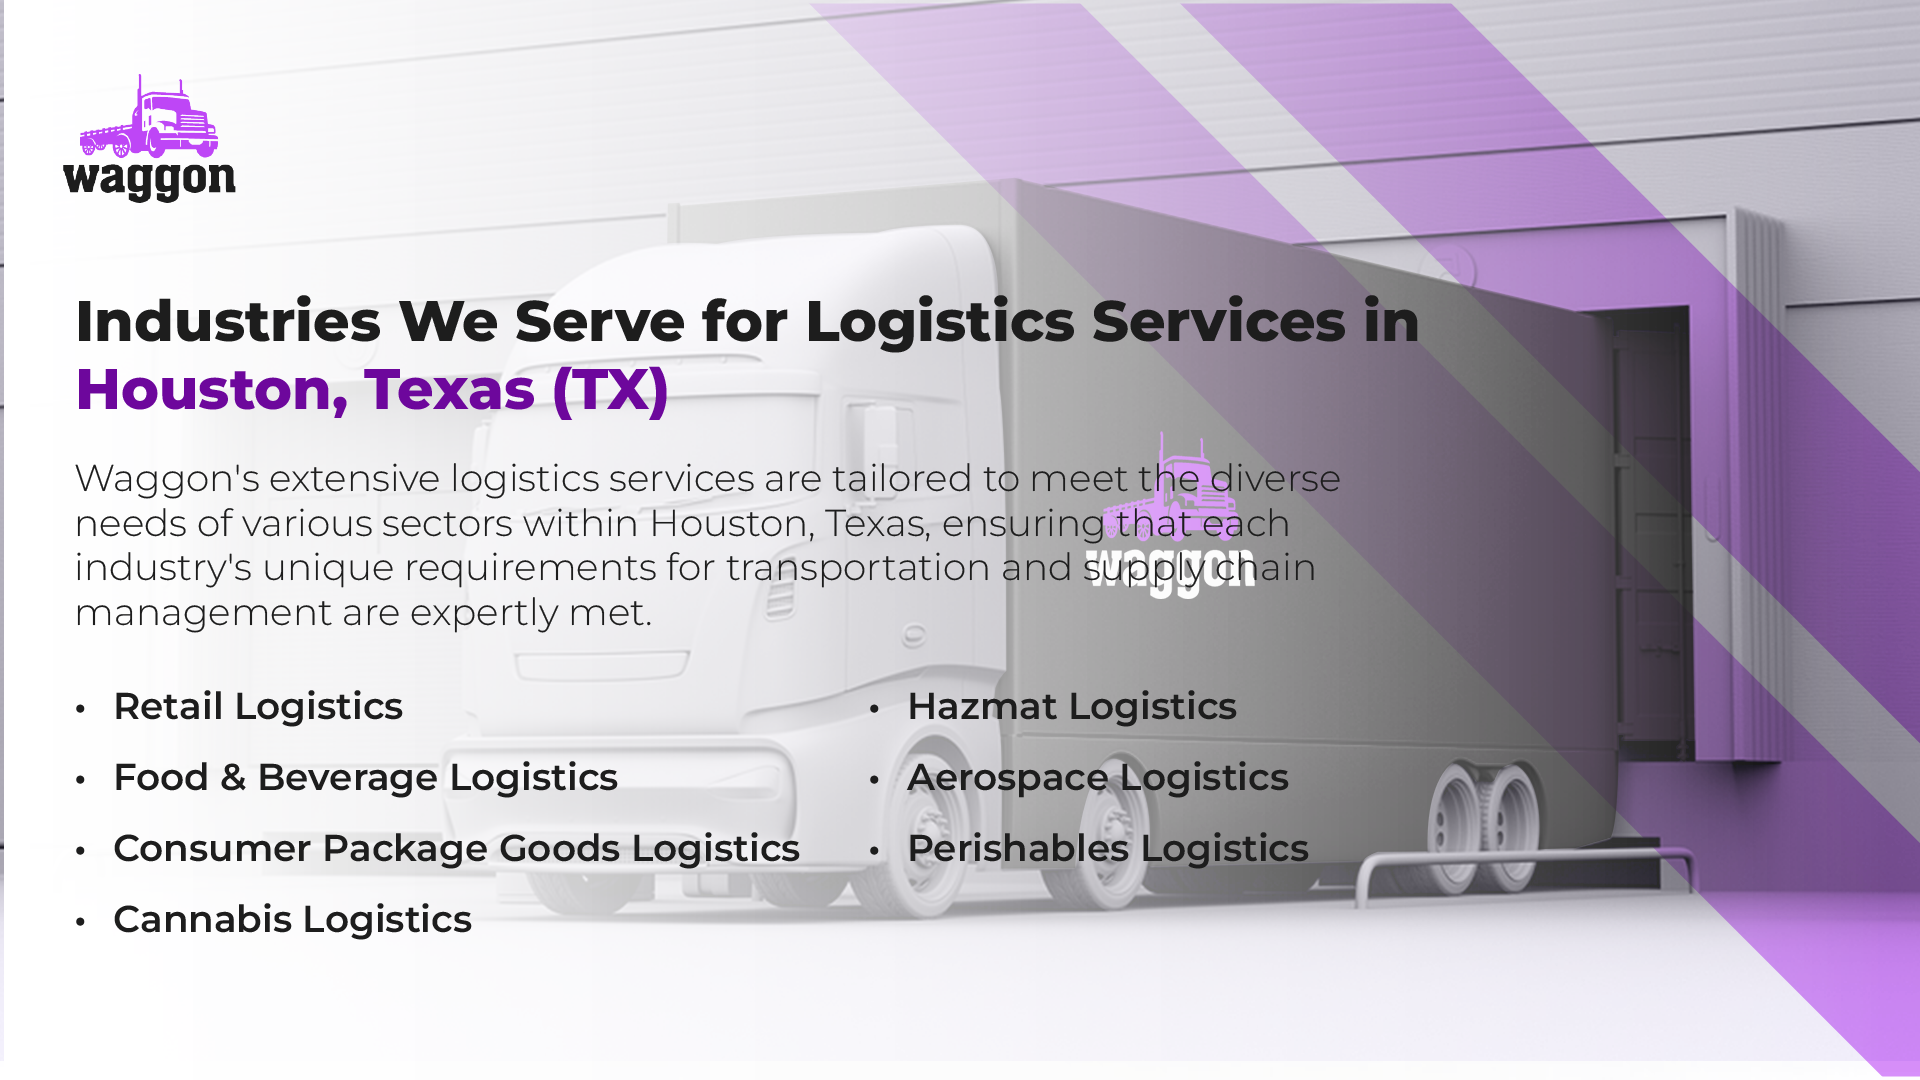 Industries We Serve for Logistics Services in Houston, Texas (TX)